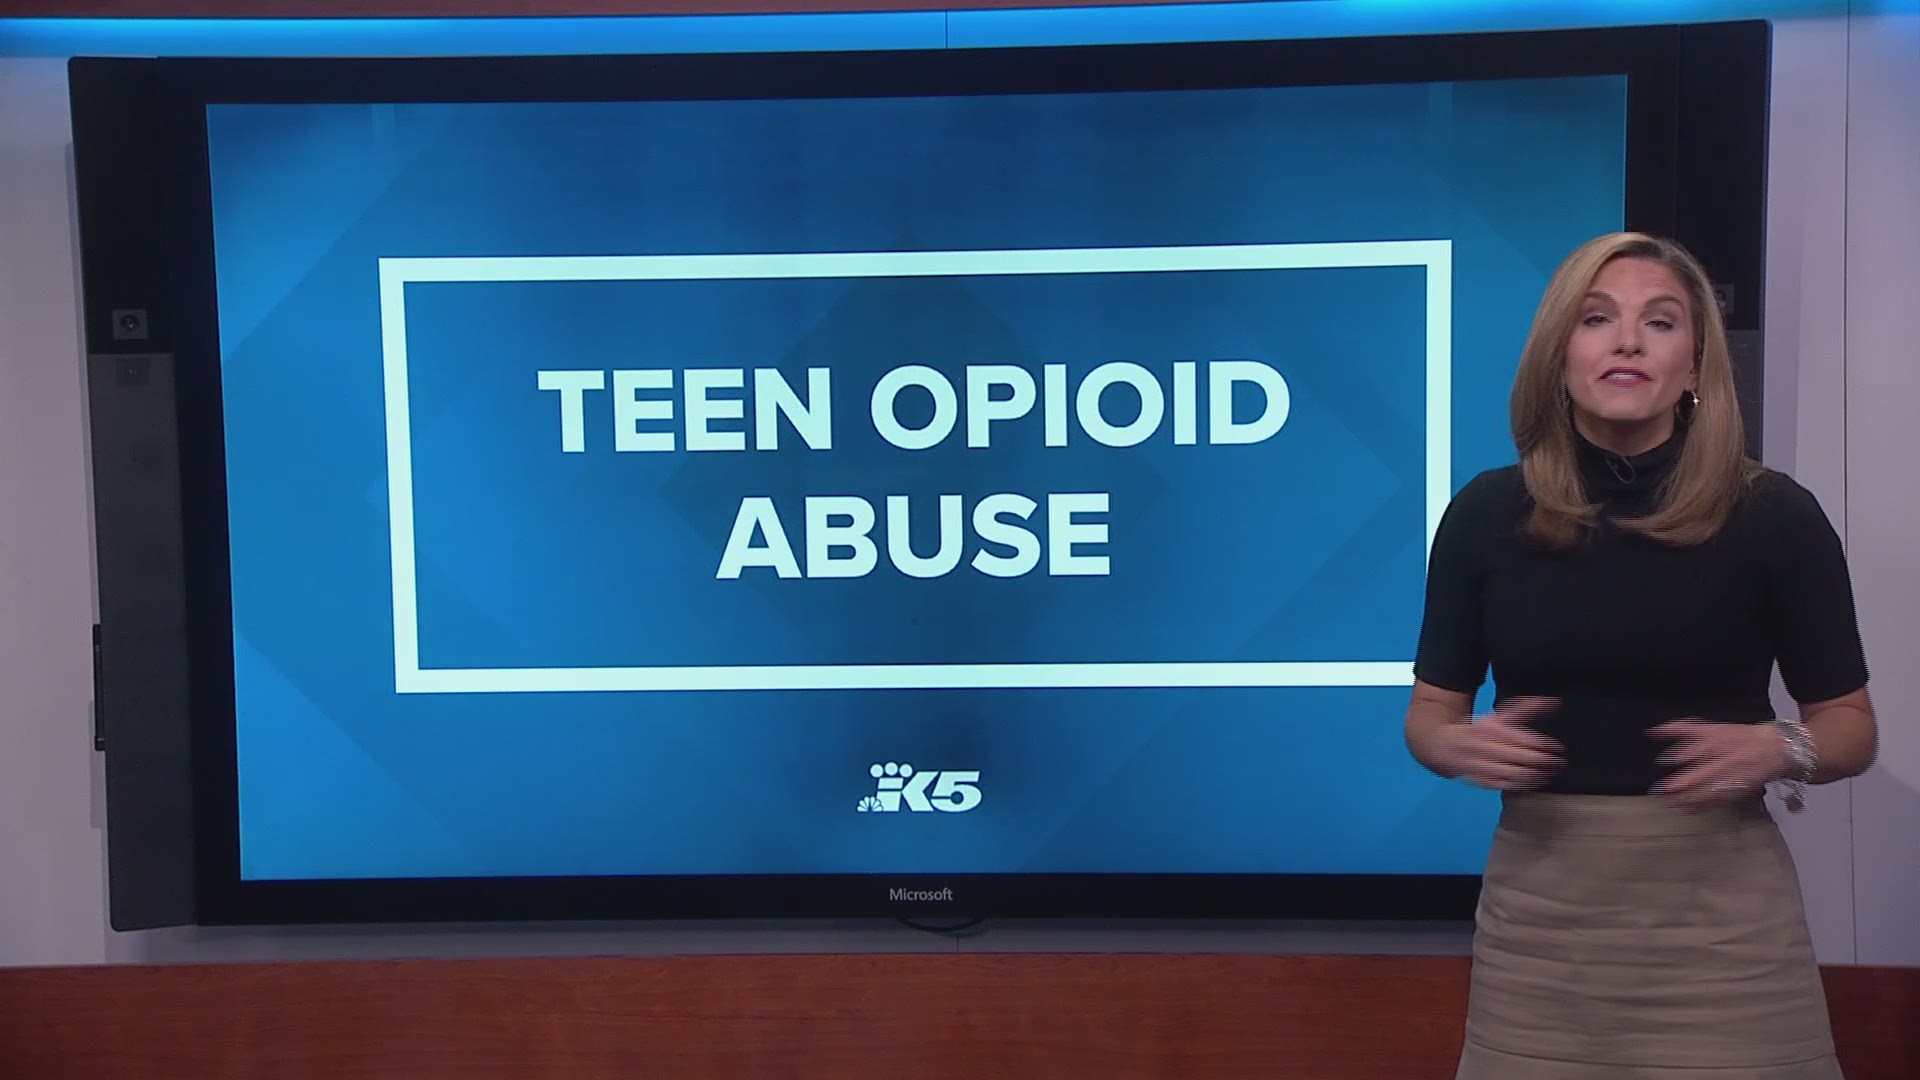 A teenager's brain is not fully developed, making them more at risk for drug abuse and addiction.